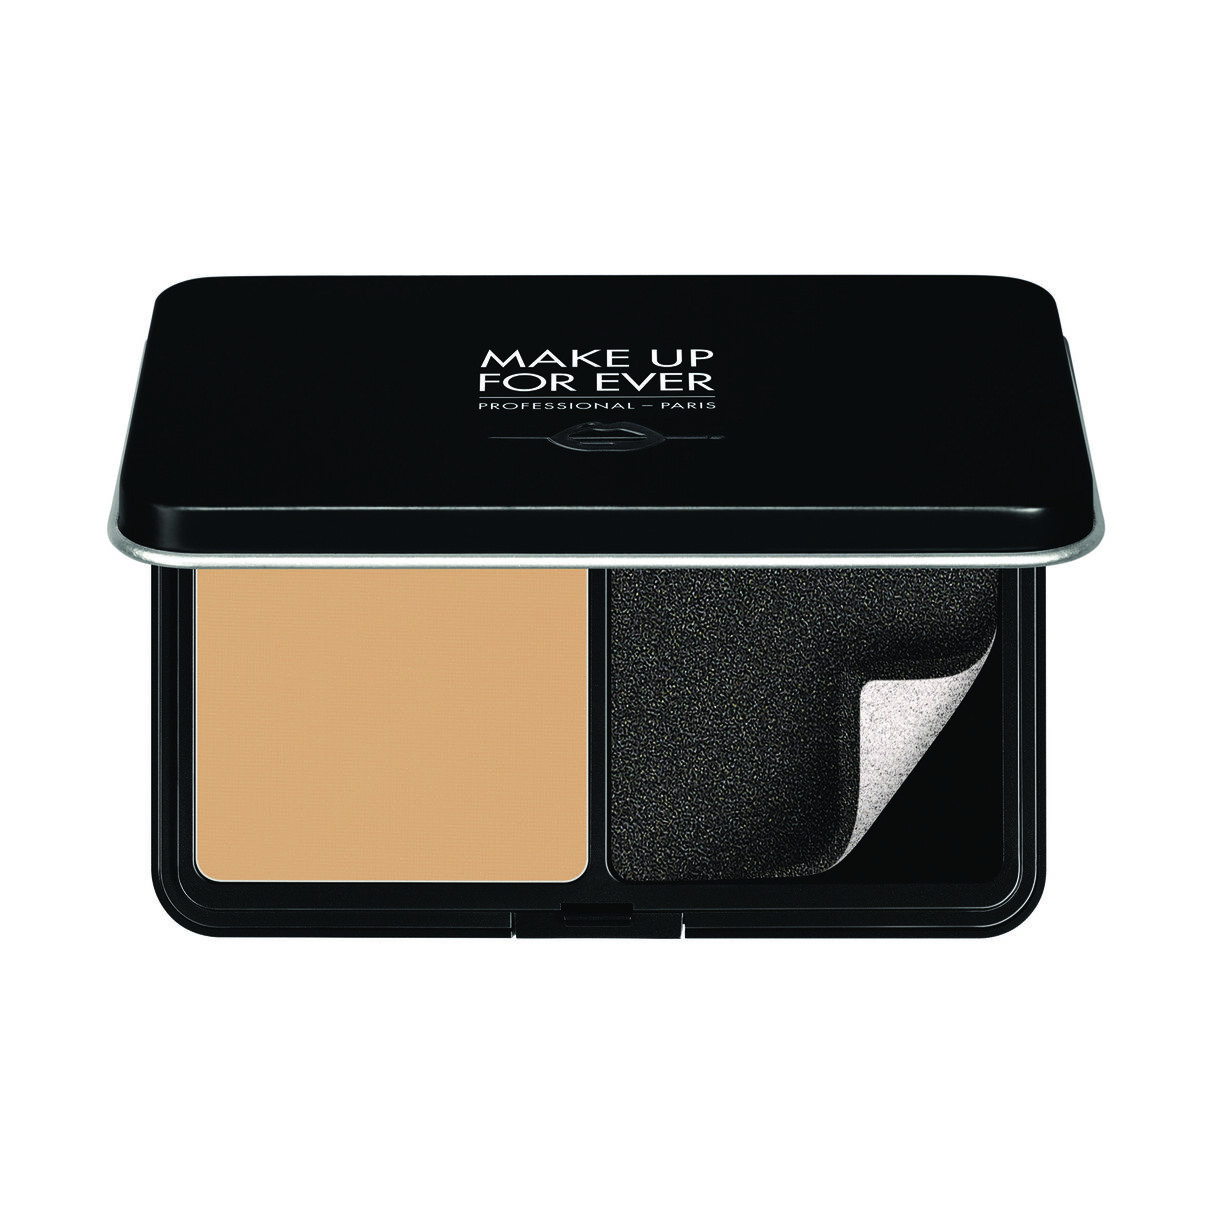 makeup forever compact powder